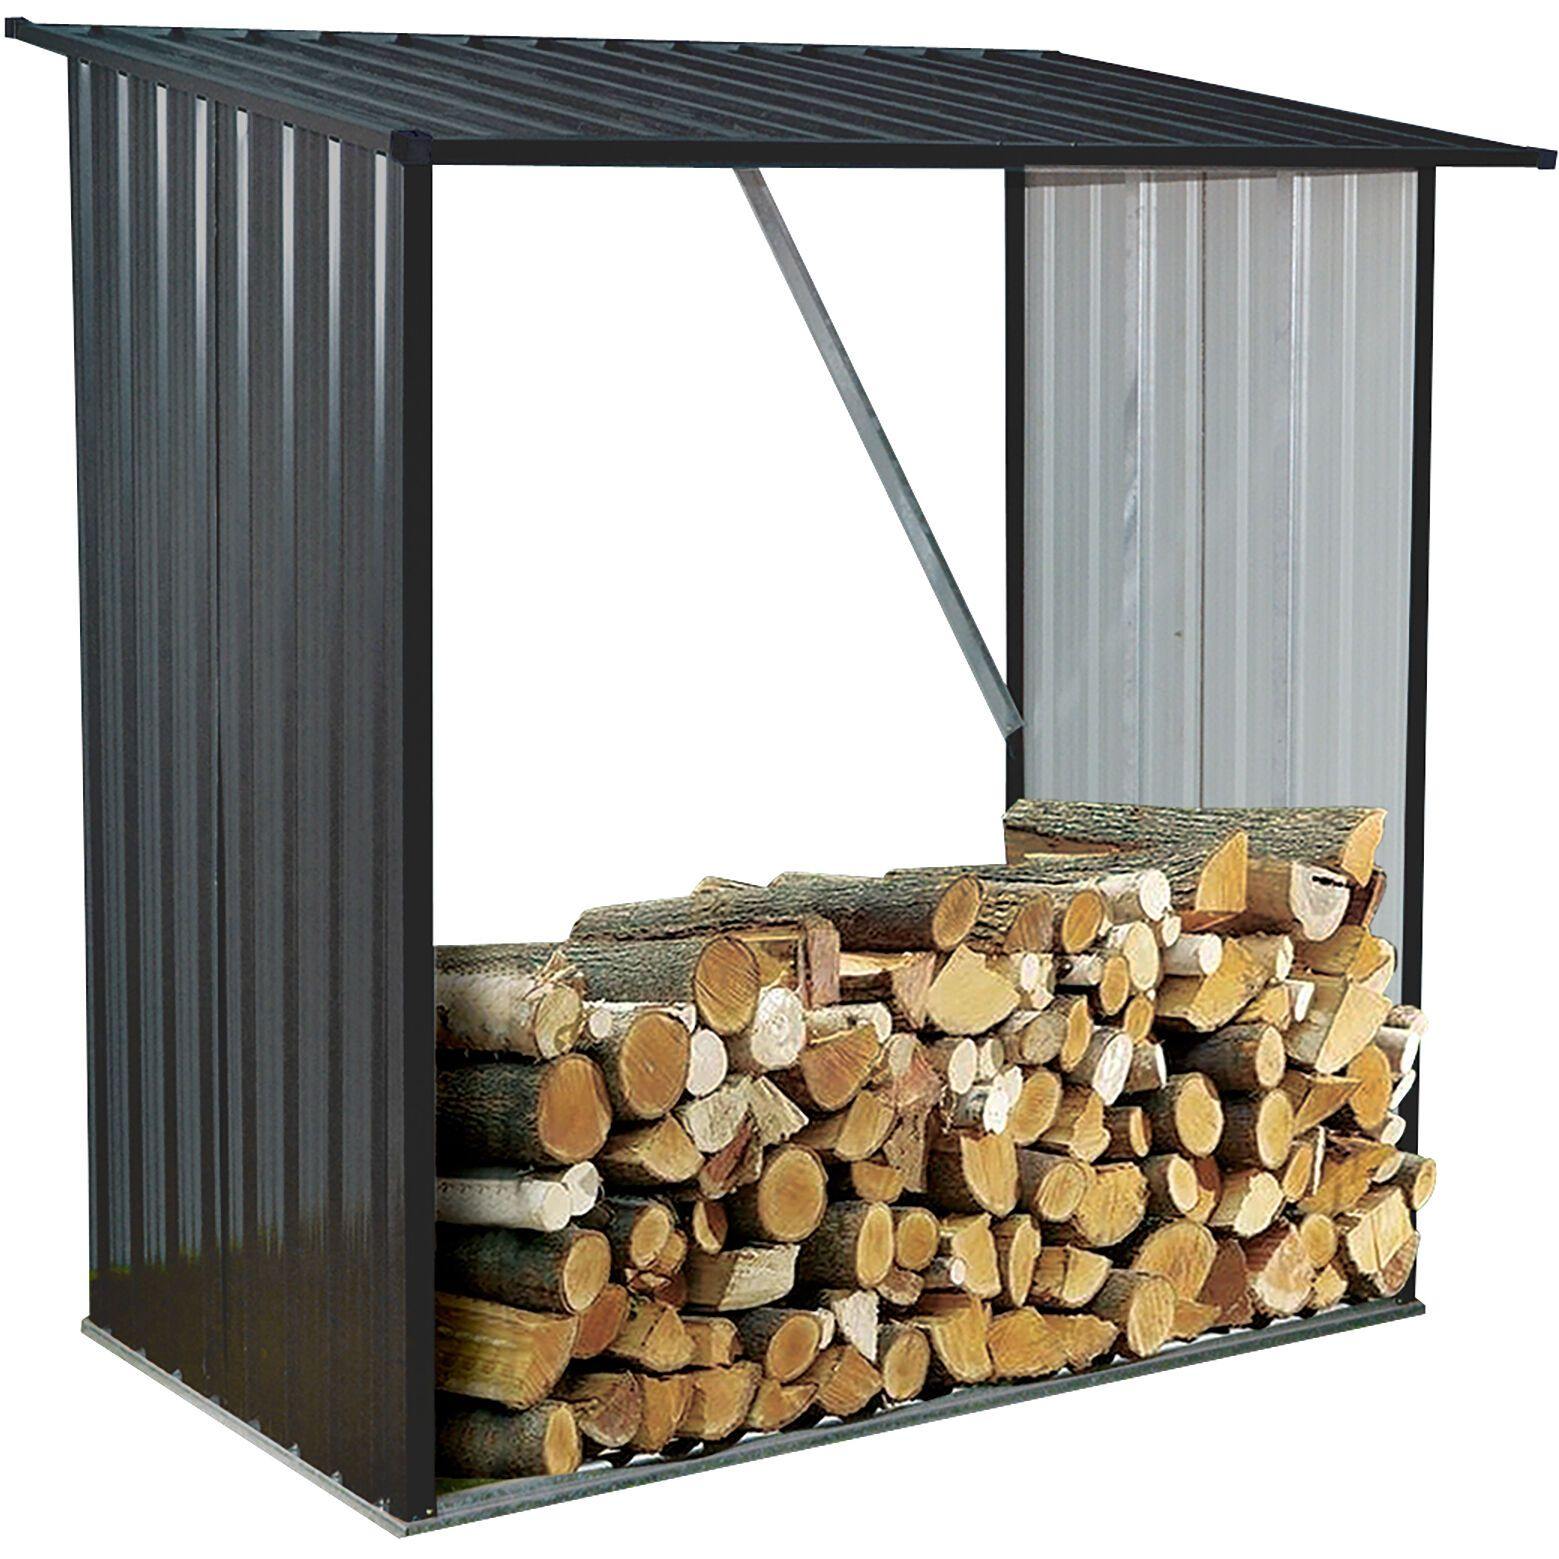 Hanover Hanover Indoor/Outdoor Galvanized Steel Woodshed Storage Rack Holds up to 55 Cu. Ft. of Stacked Firewood, Dark Gray